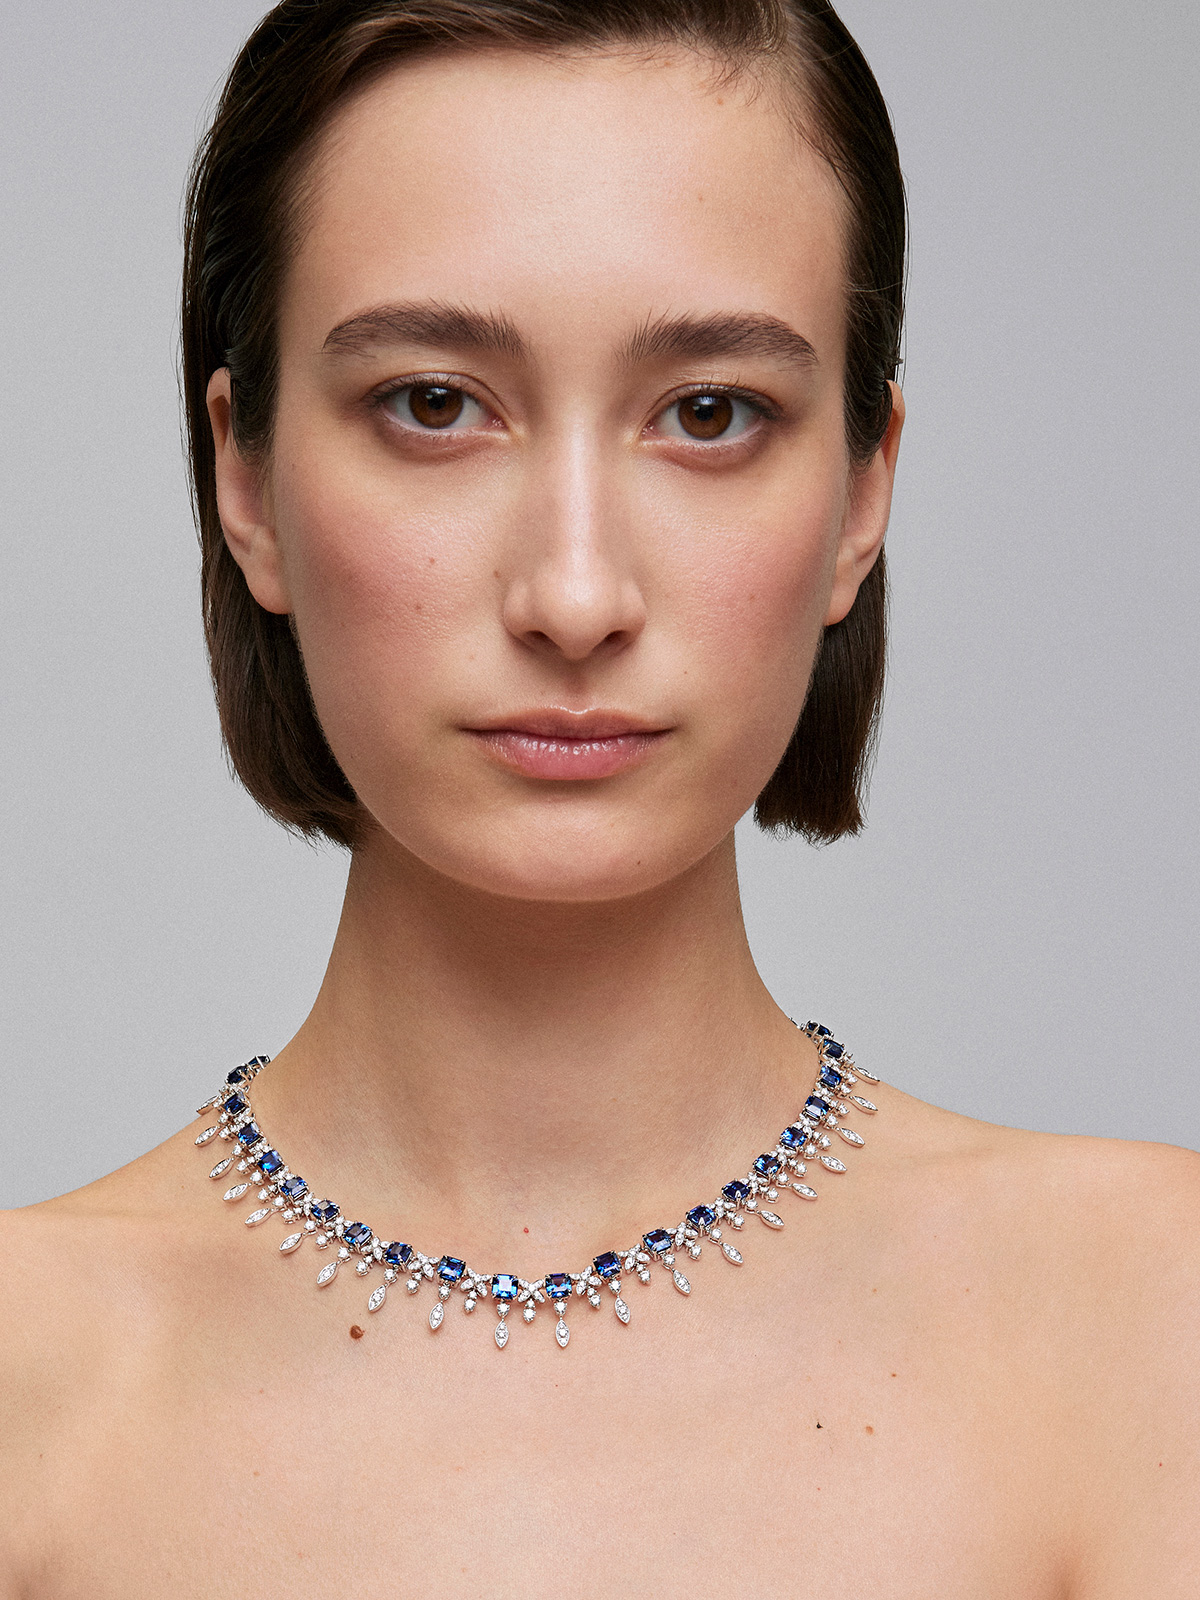 18K White Gold necklace with blue sapphires in 41.02 cts and white diamonds in bright 9.56 CTS diamonds